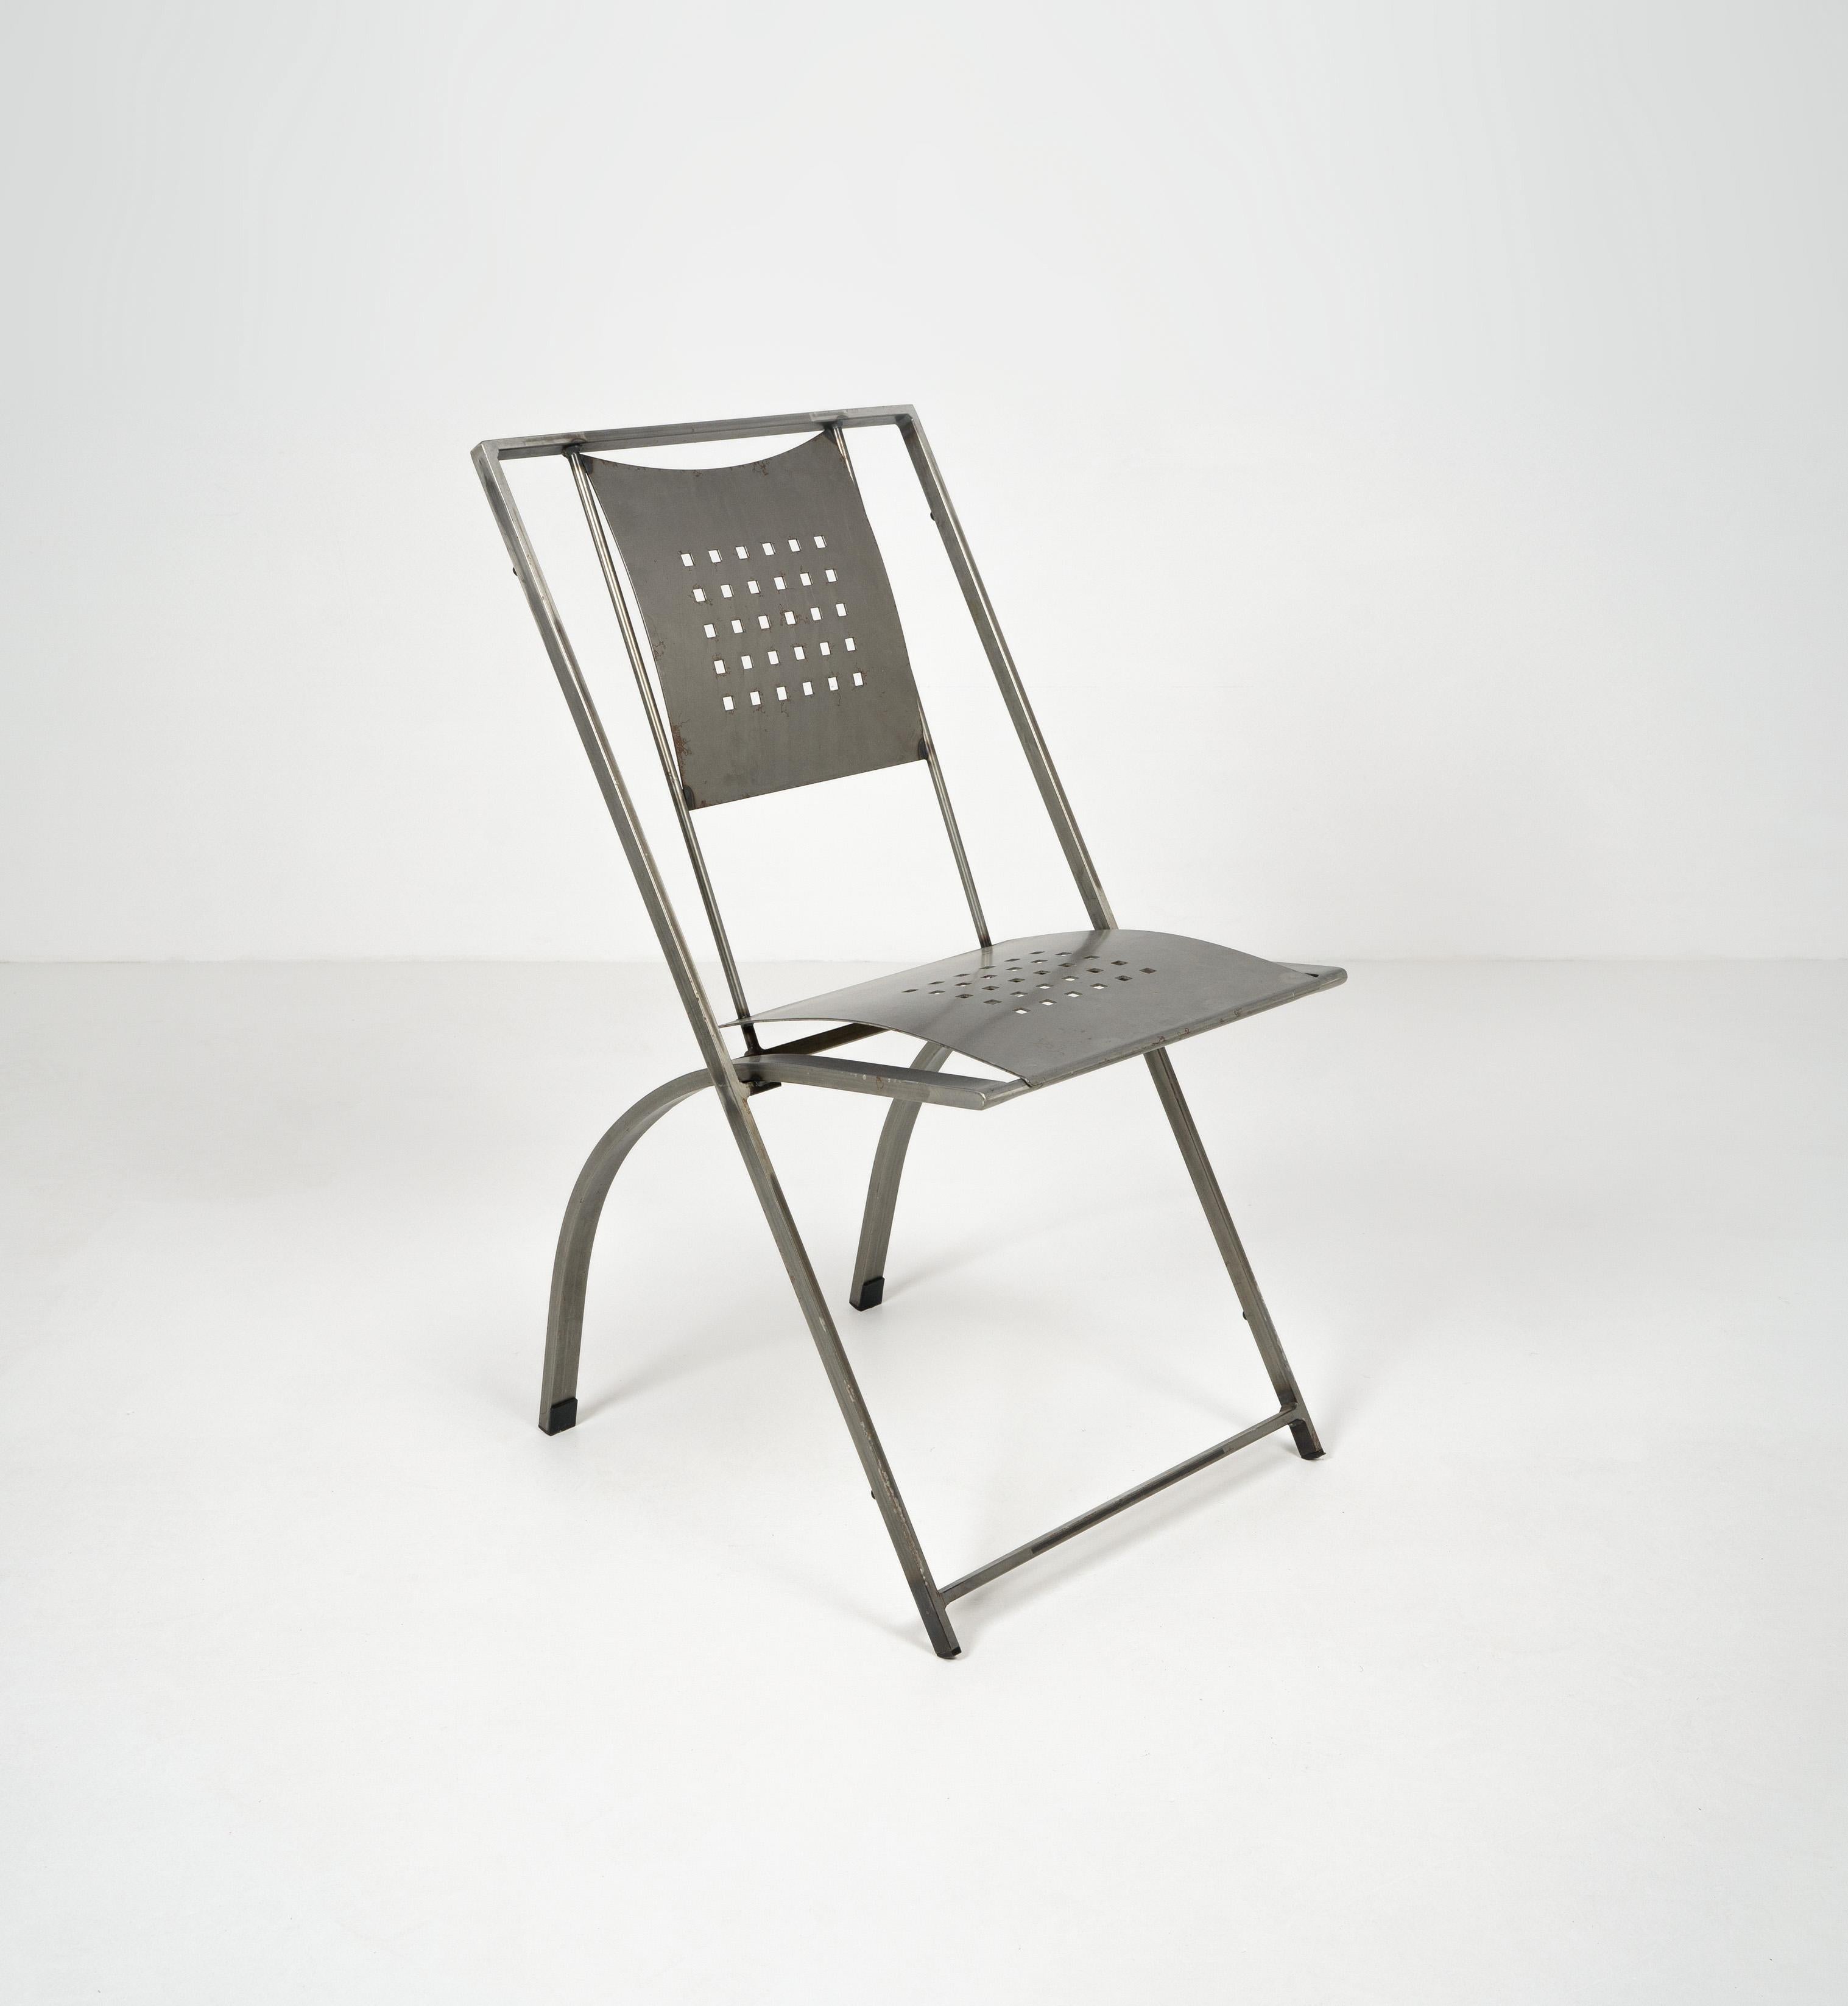 Postmodern industrial style ‘Hunter’ side chair,  designed by Karl Friedrich Förster and produced by KFF, c.1980

Dimensions (cm, approx):
Height: 88
Width: 55
Depth: 55

In good vintage condition with various surface imperfections as pictured.  
